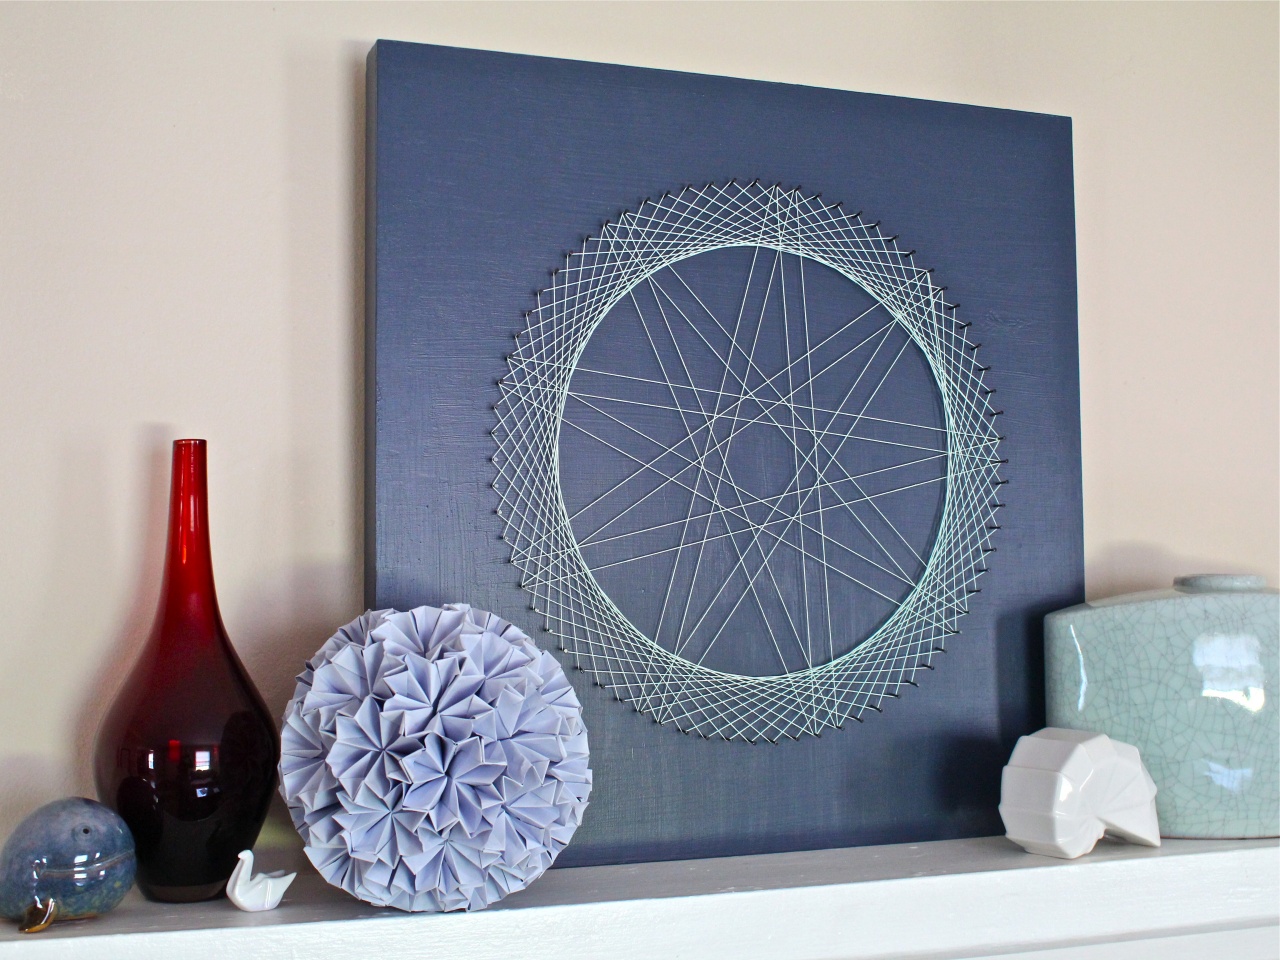 The finished string art piece | Thyme Bombe